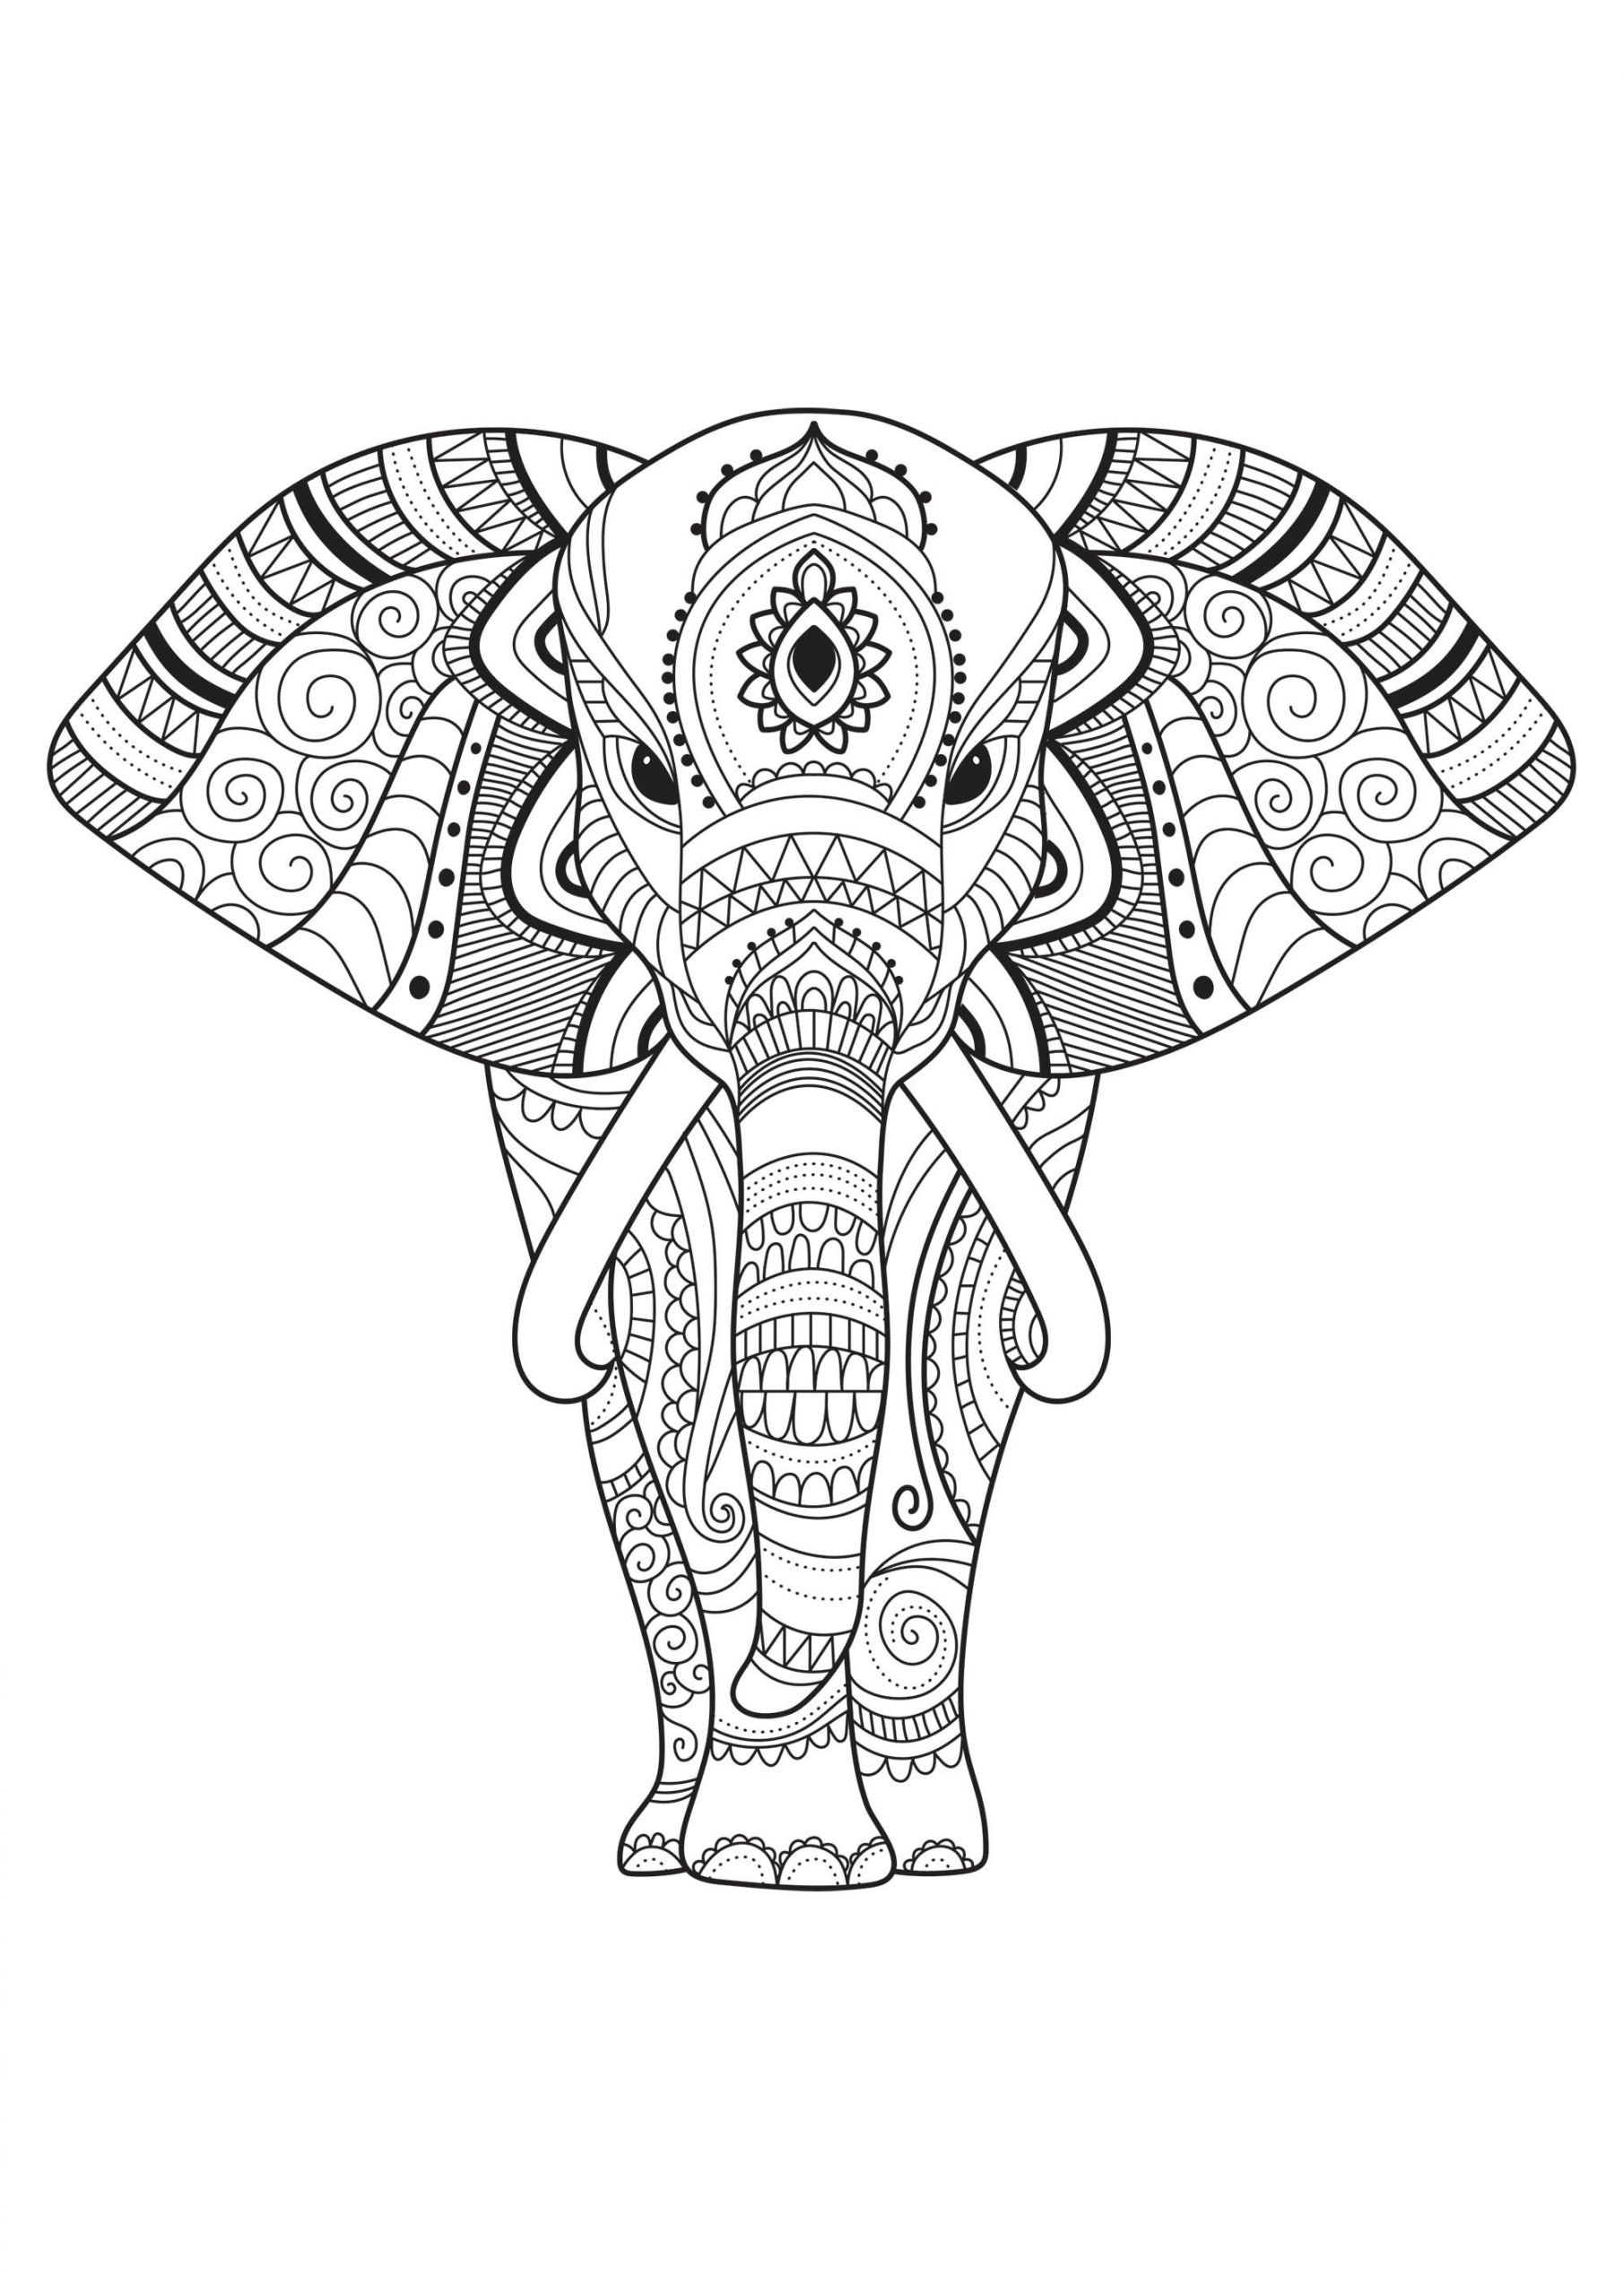 Adult Coloring Book Elephant
 Elephant with simple patterns Elephants Adult Coloring Pages